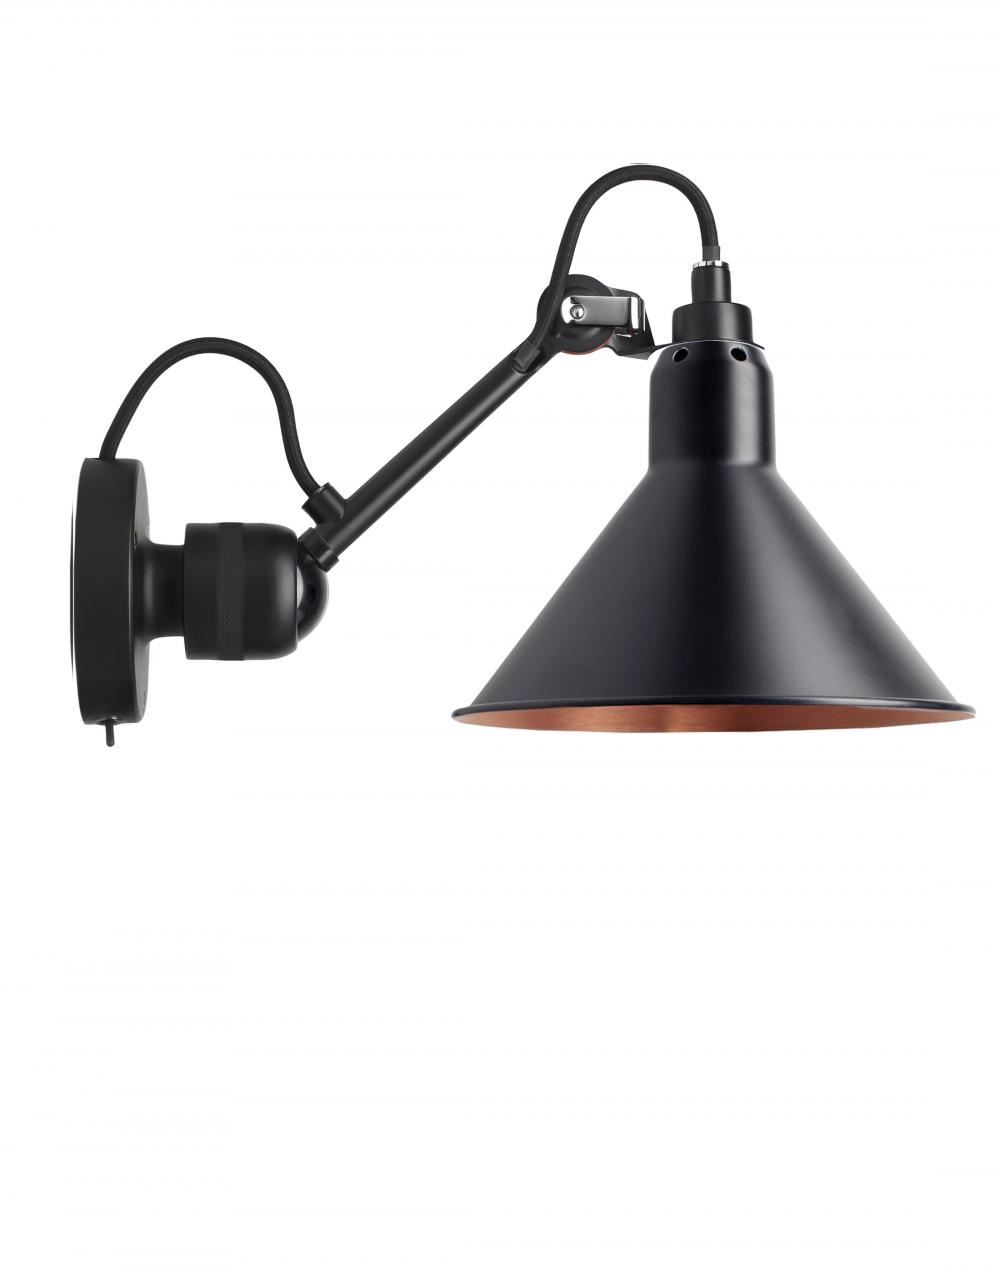 Lampe Gras 304 Small Wall Light Black Arm Black Shade With Copper Interior Conic Integral Switch